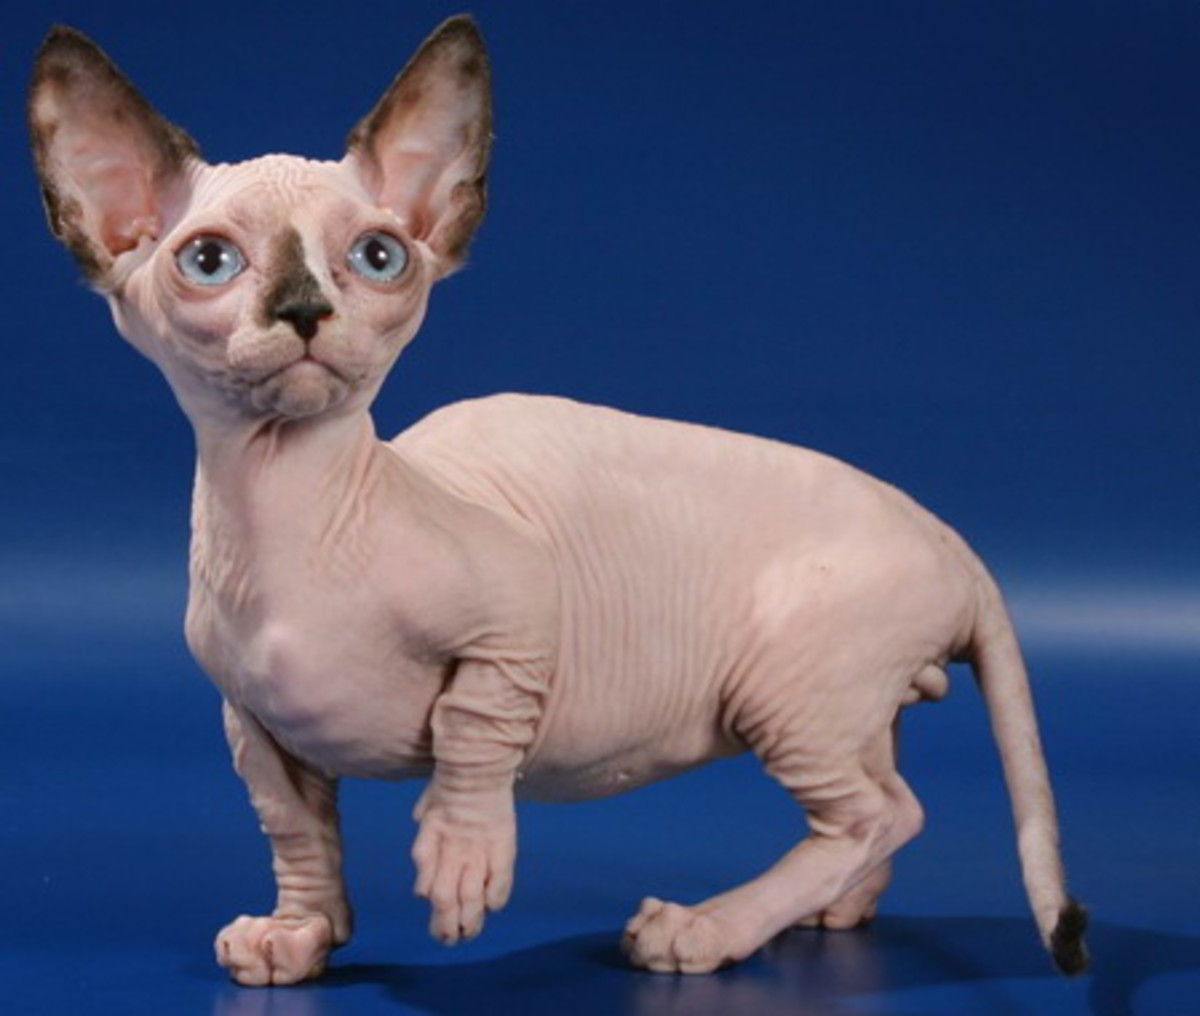 7 Hairless Cat Breeds: Cats Without Fur - PetHelpful